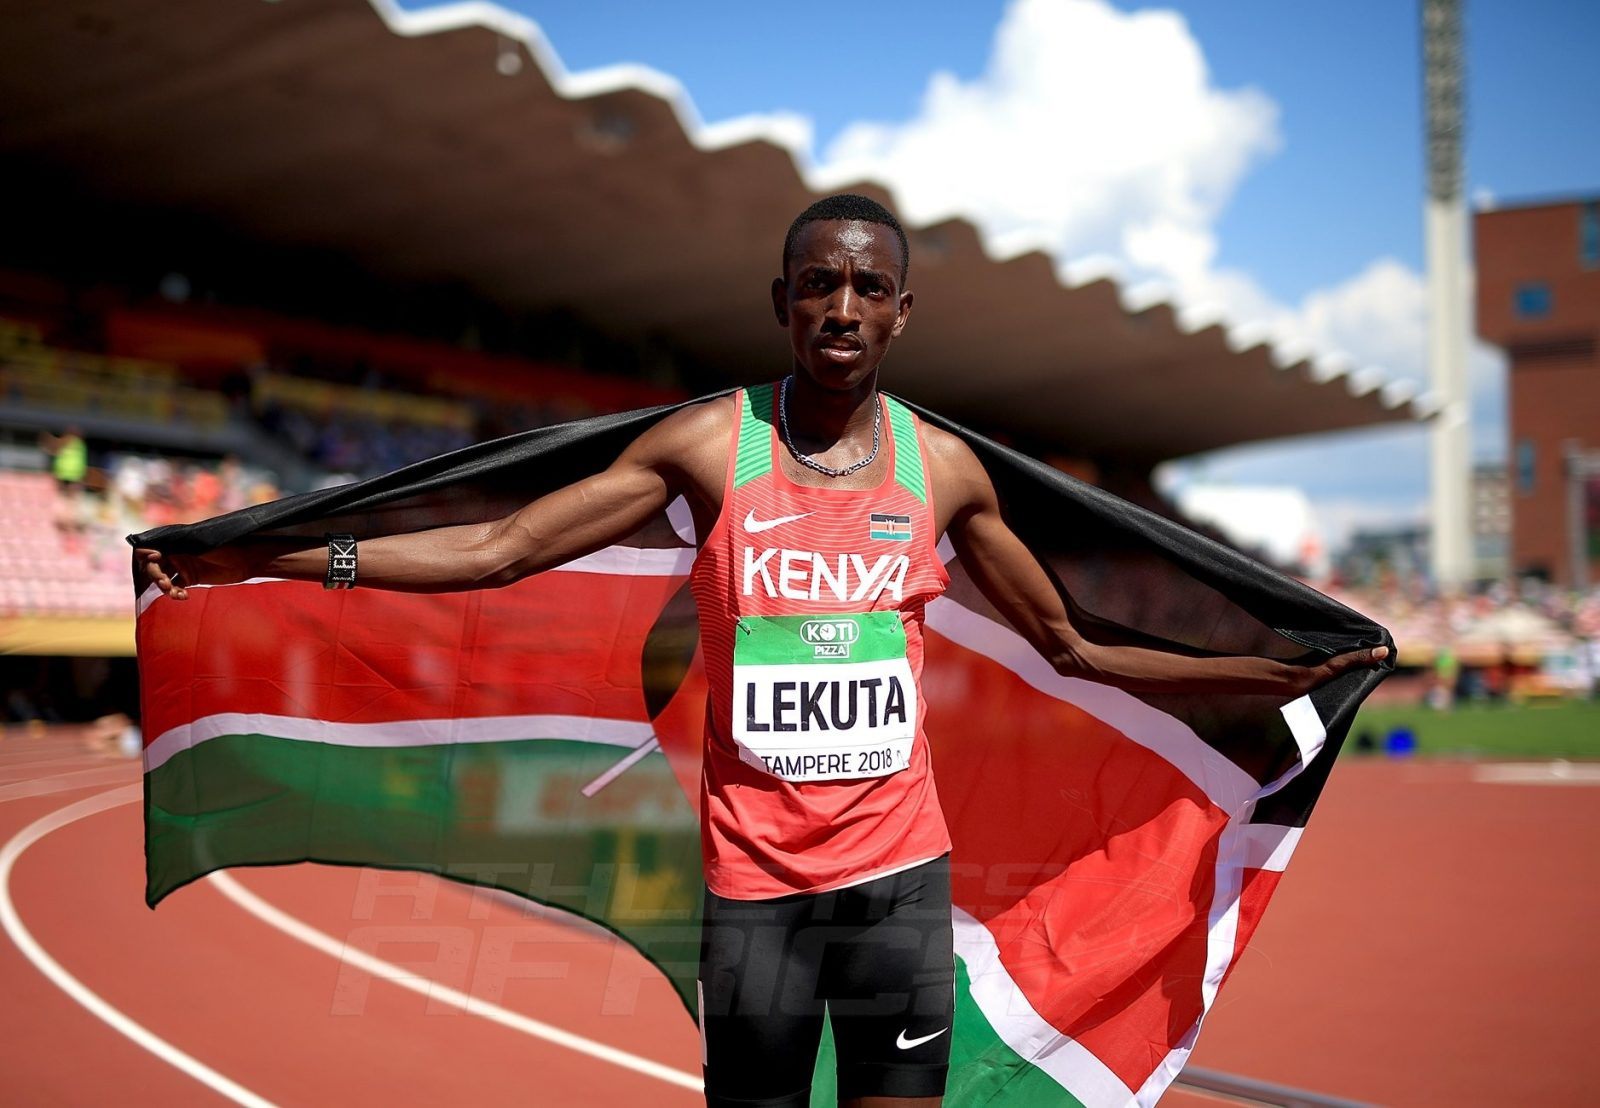 Solomon Lekuta takes the men's 800m gold for Kenya at the IAAF World U20 Championships Tampere 2018 / Photo Credit: Getty Images for IAAF